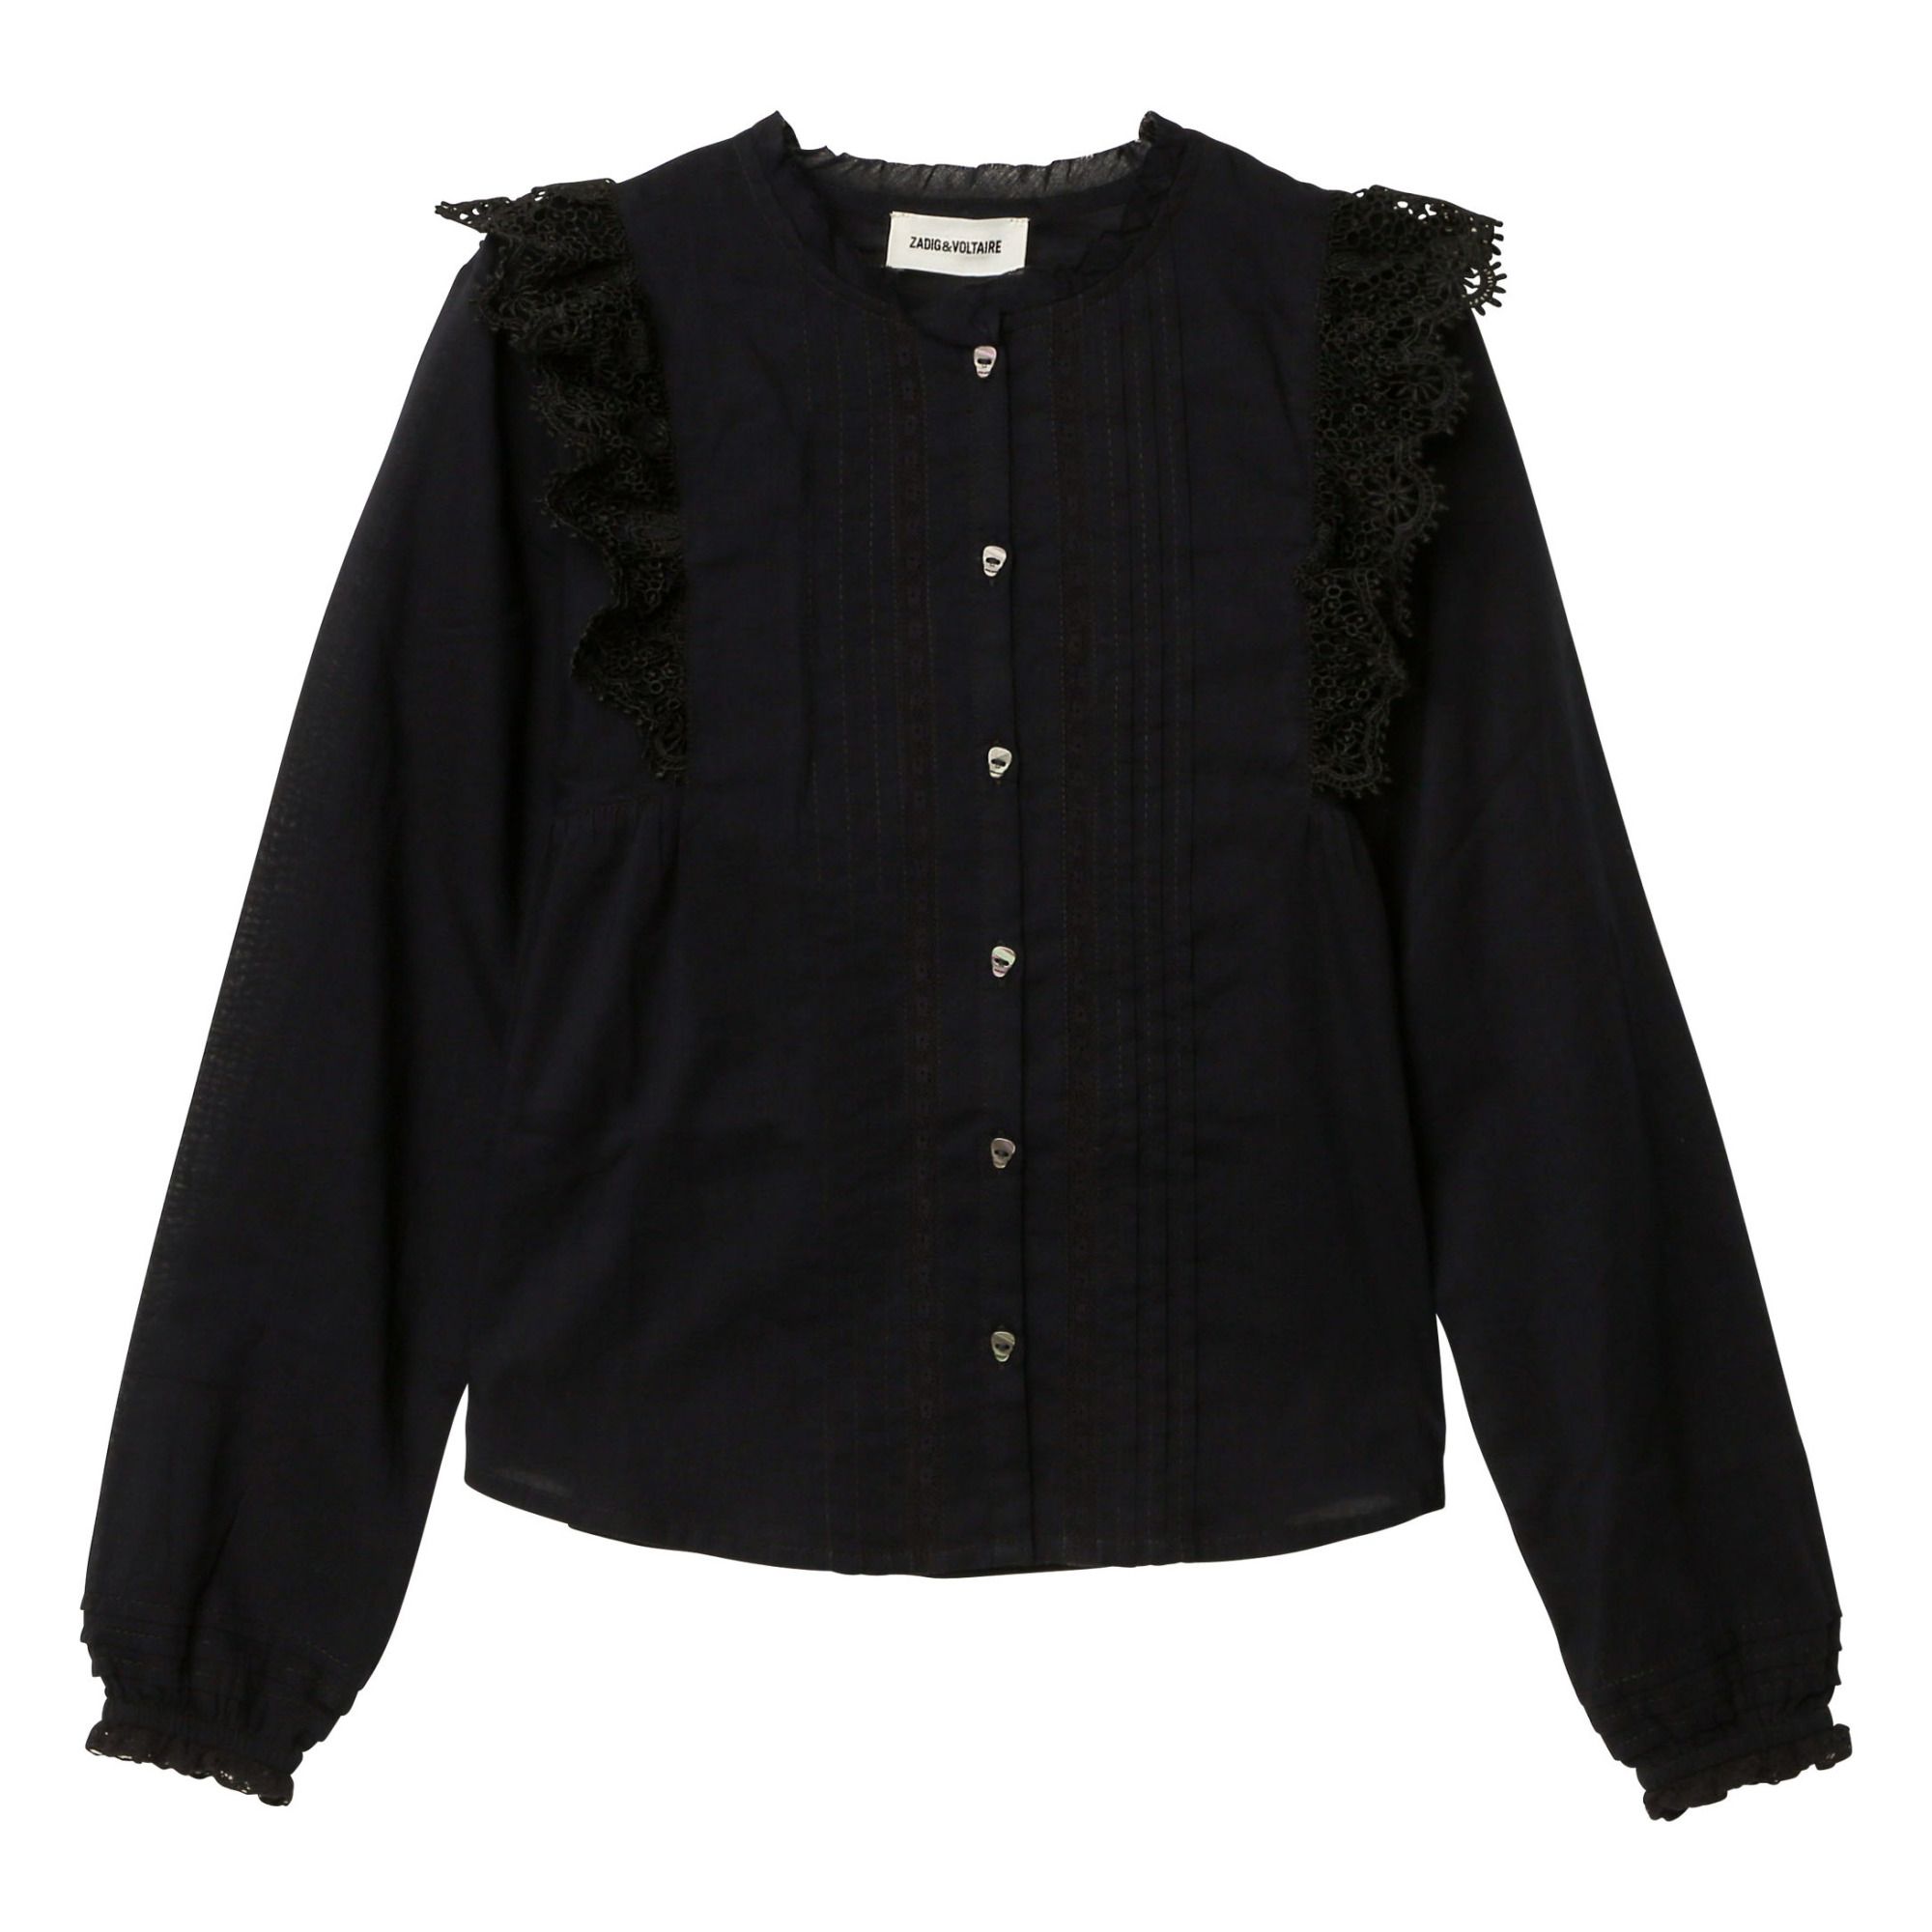 Embroidered Blouse Black Zadig & Voltaire Fashion Teen